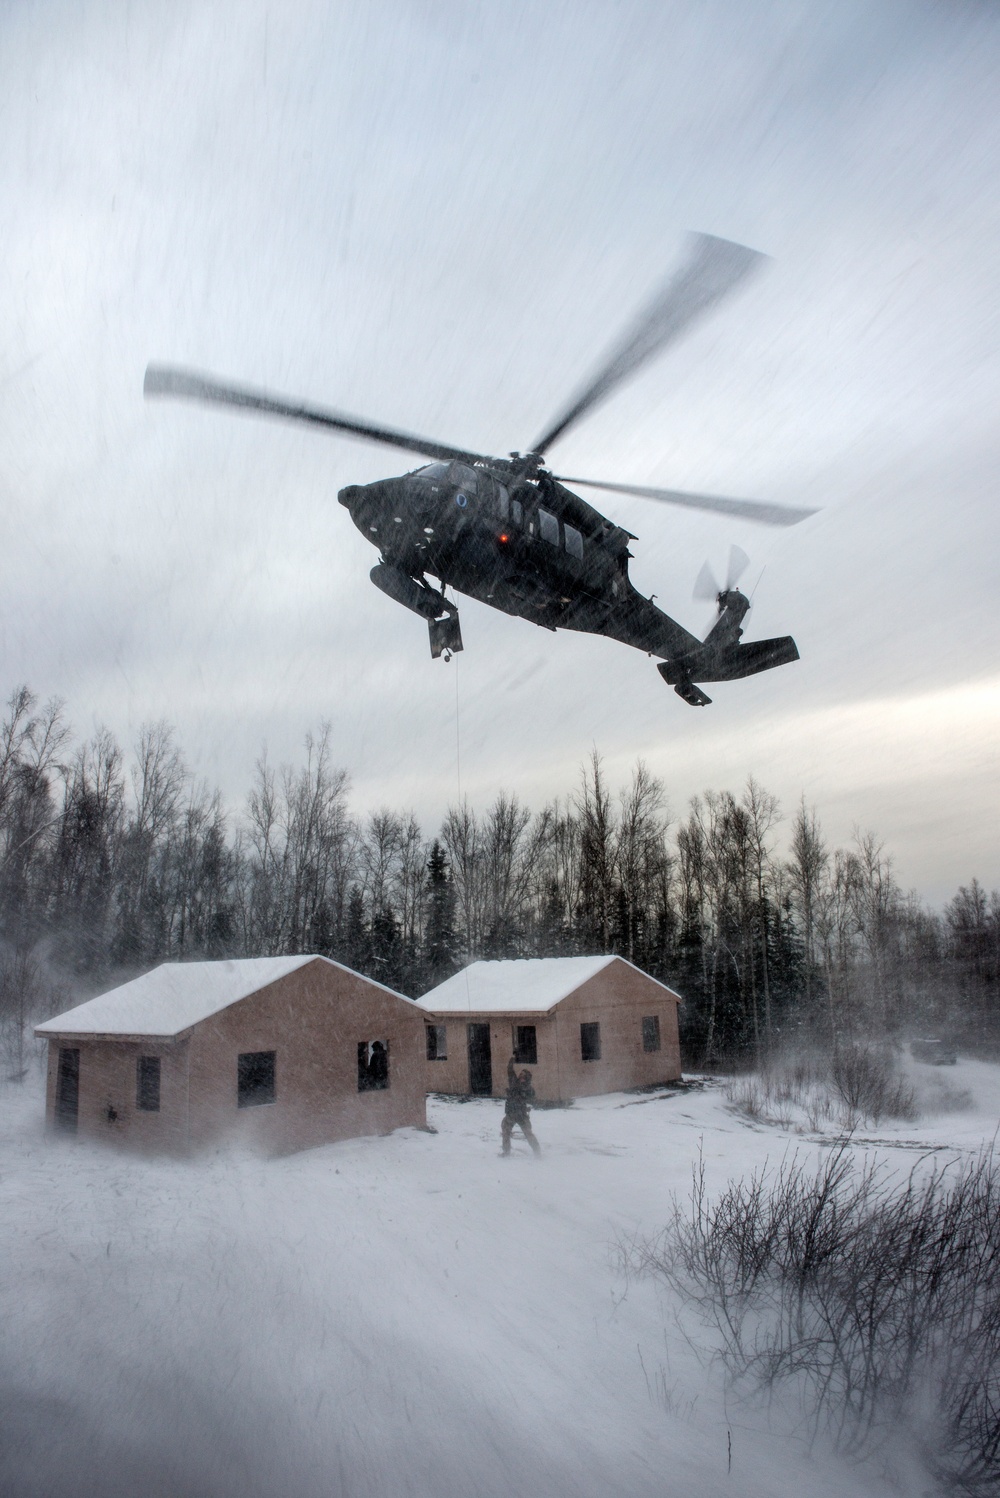 Alaska Air National Guard and Alaska Army National Guard cooperate for mass-casualty training exercise at JBER